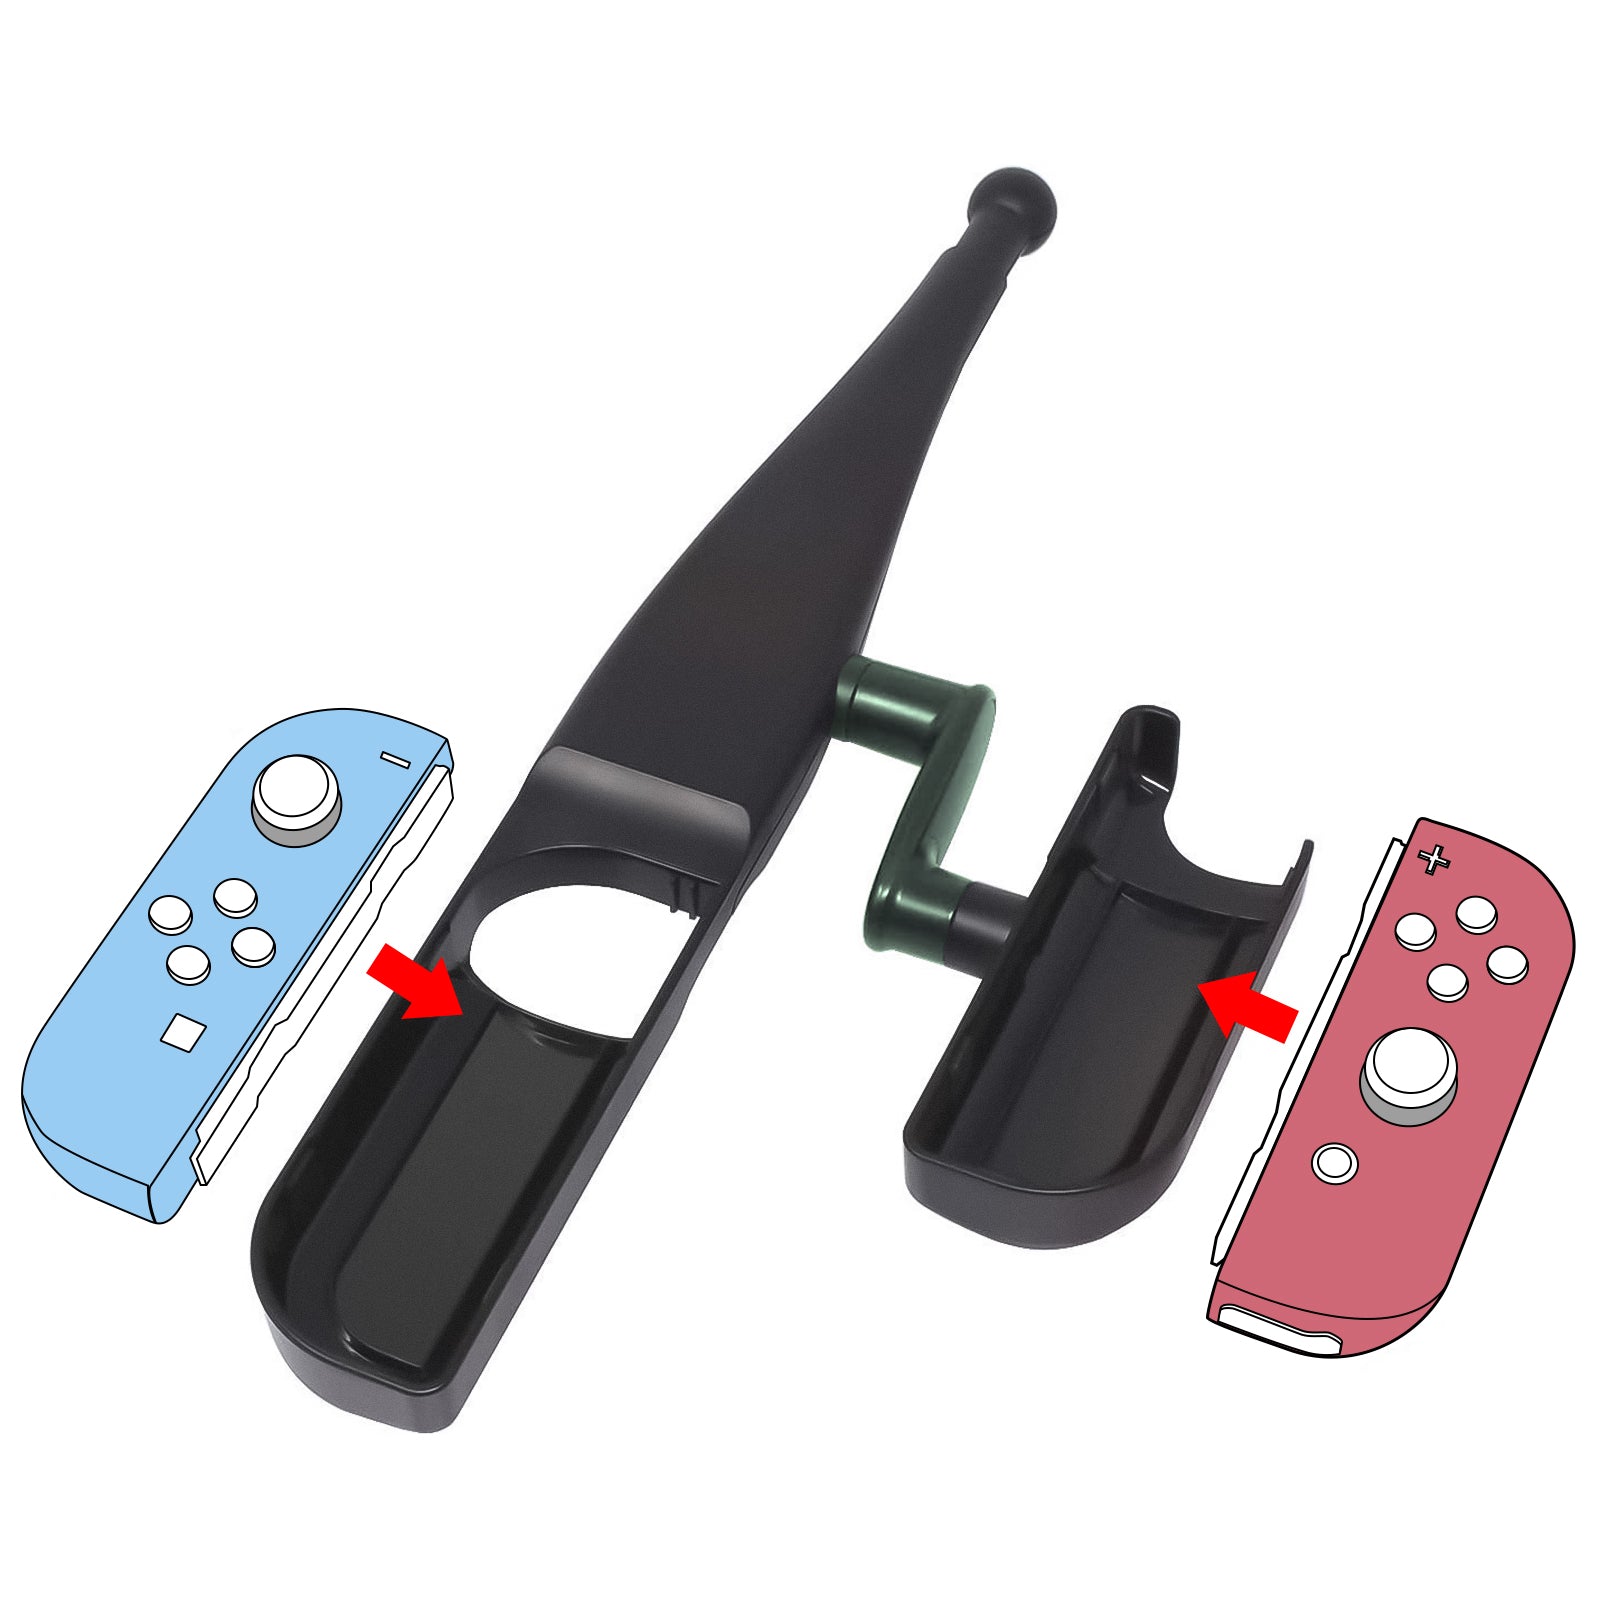 Geekria Fishing Rod Compatible with Switch Joy-Con Game Kit Compatible